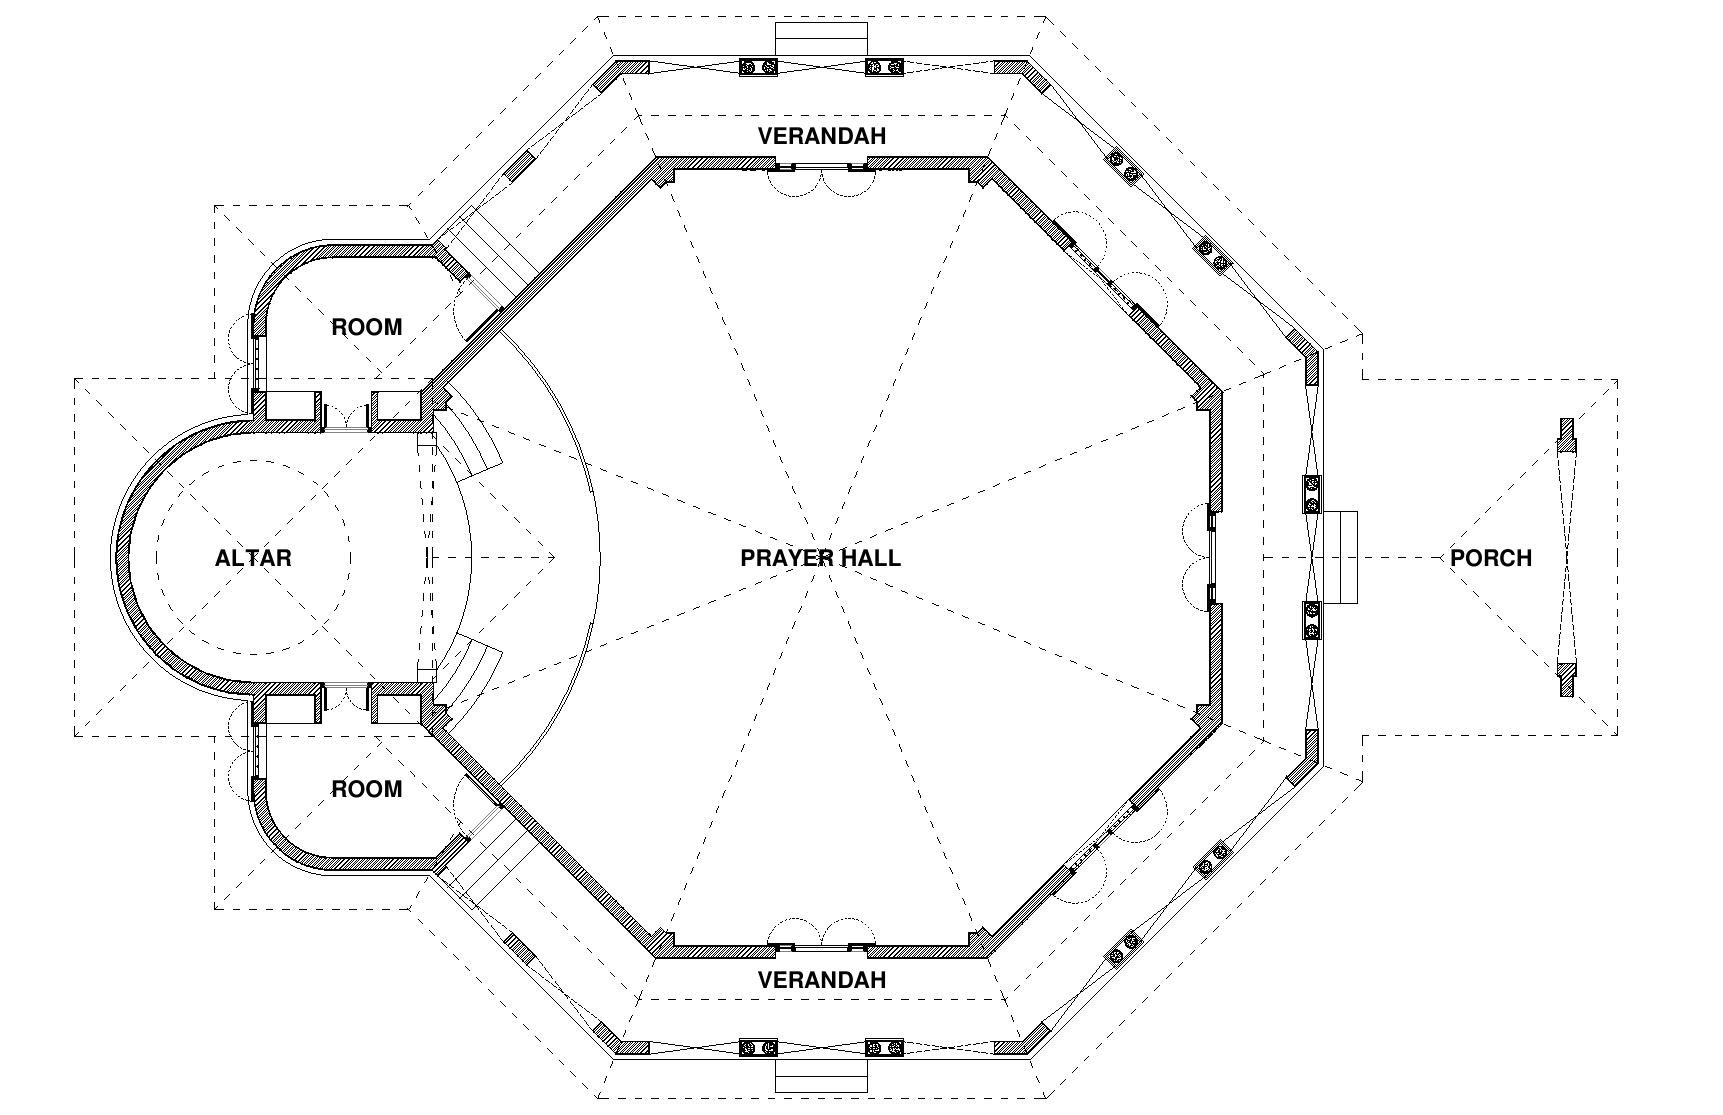 Ground Floor Plan of The Lord's House